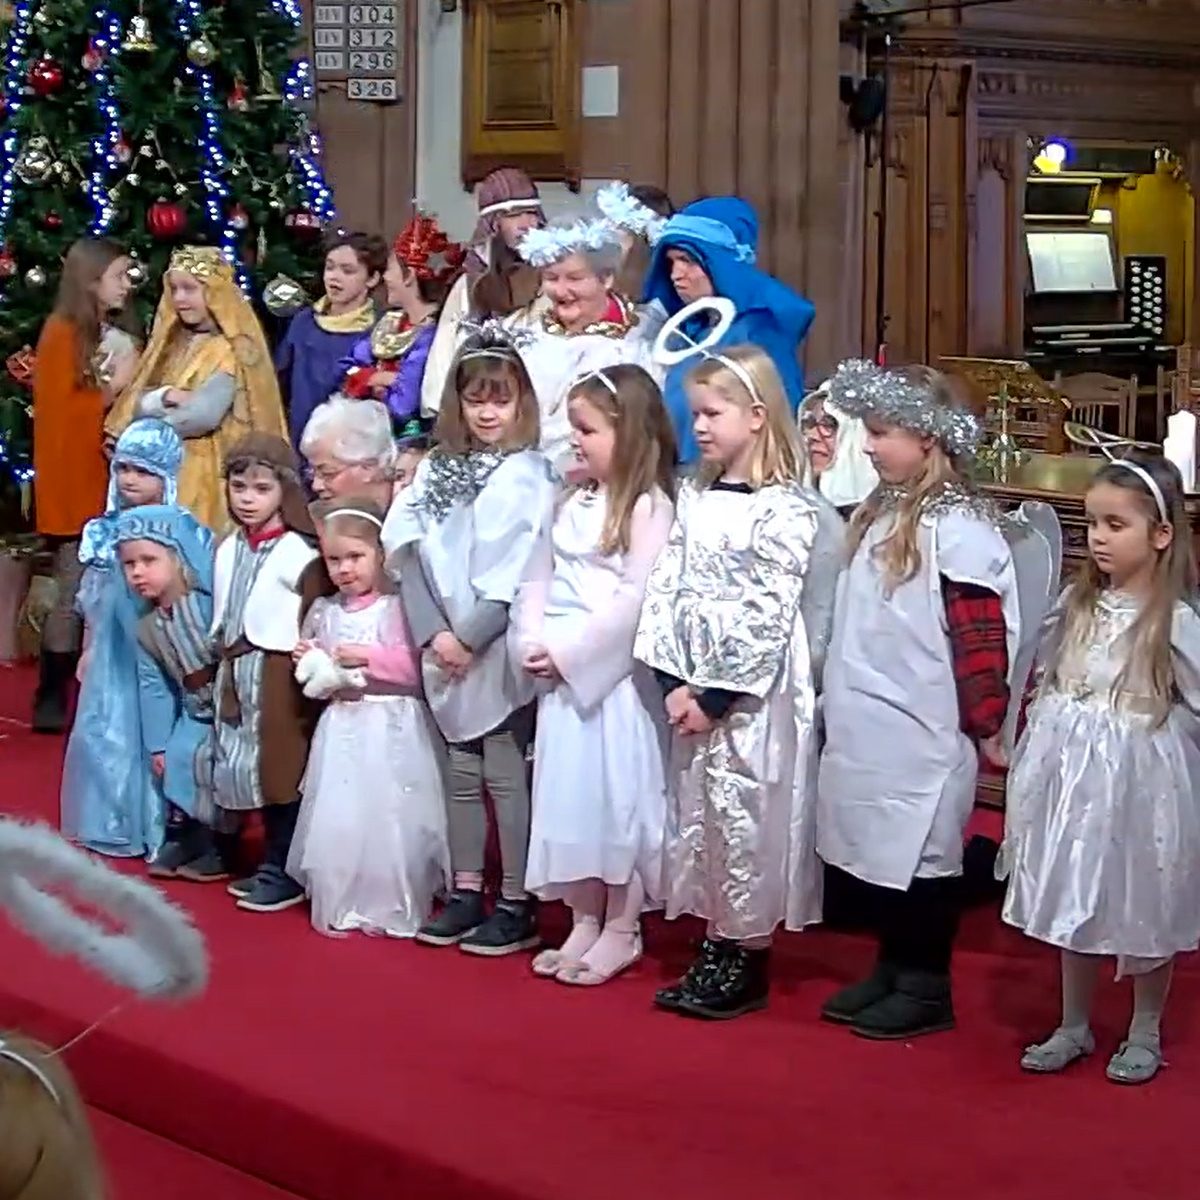 Scene from Pop-up Nativity 2022 at Troon Old